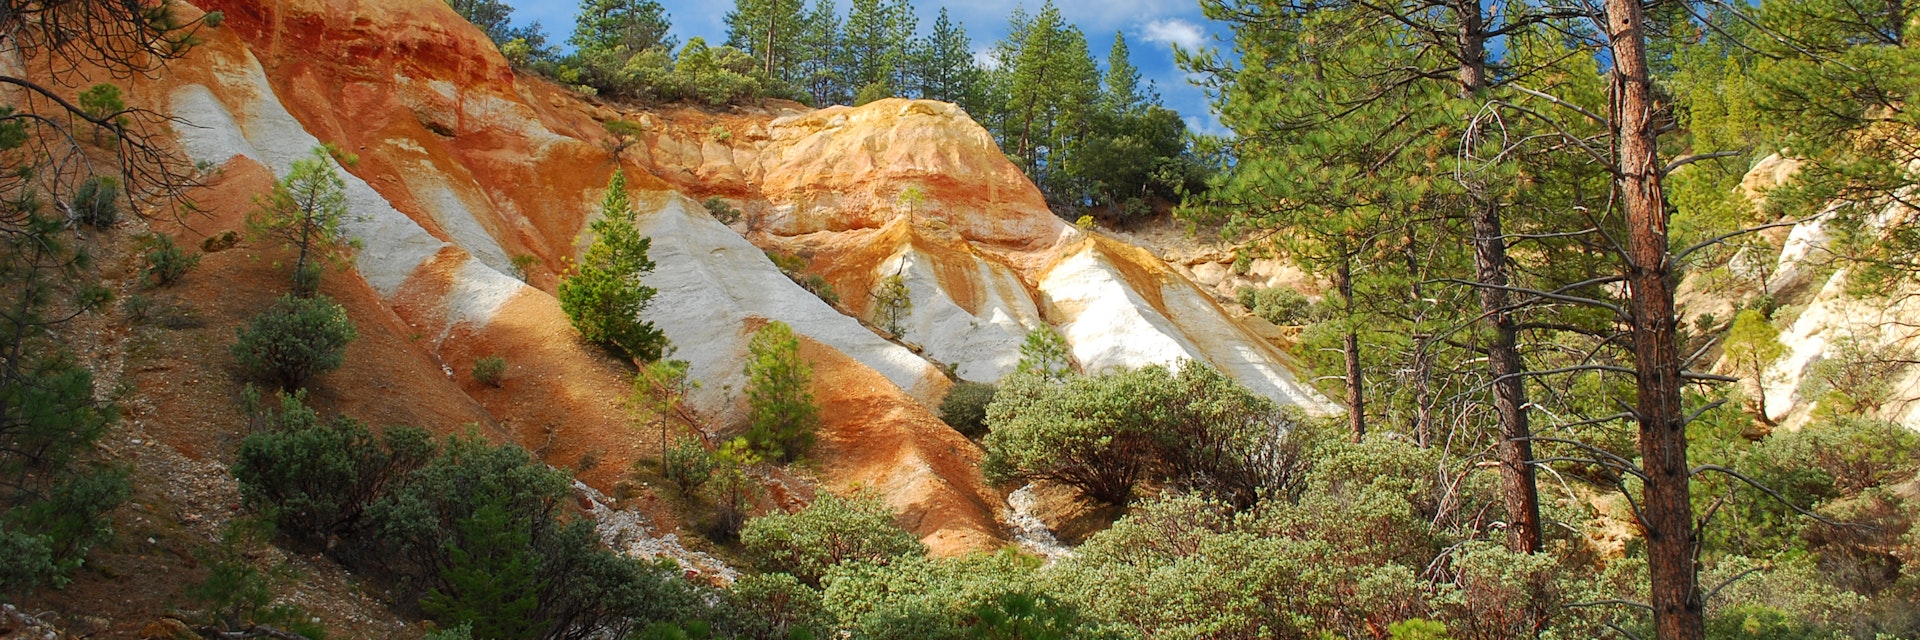 Malakoff Diggins State Historic Park is a state park unit preserving the largest hydraulic mining site in California.